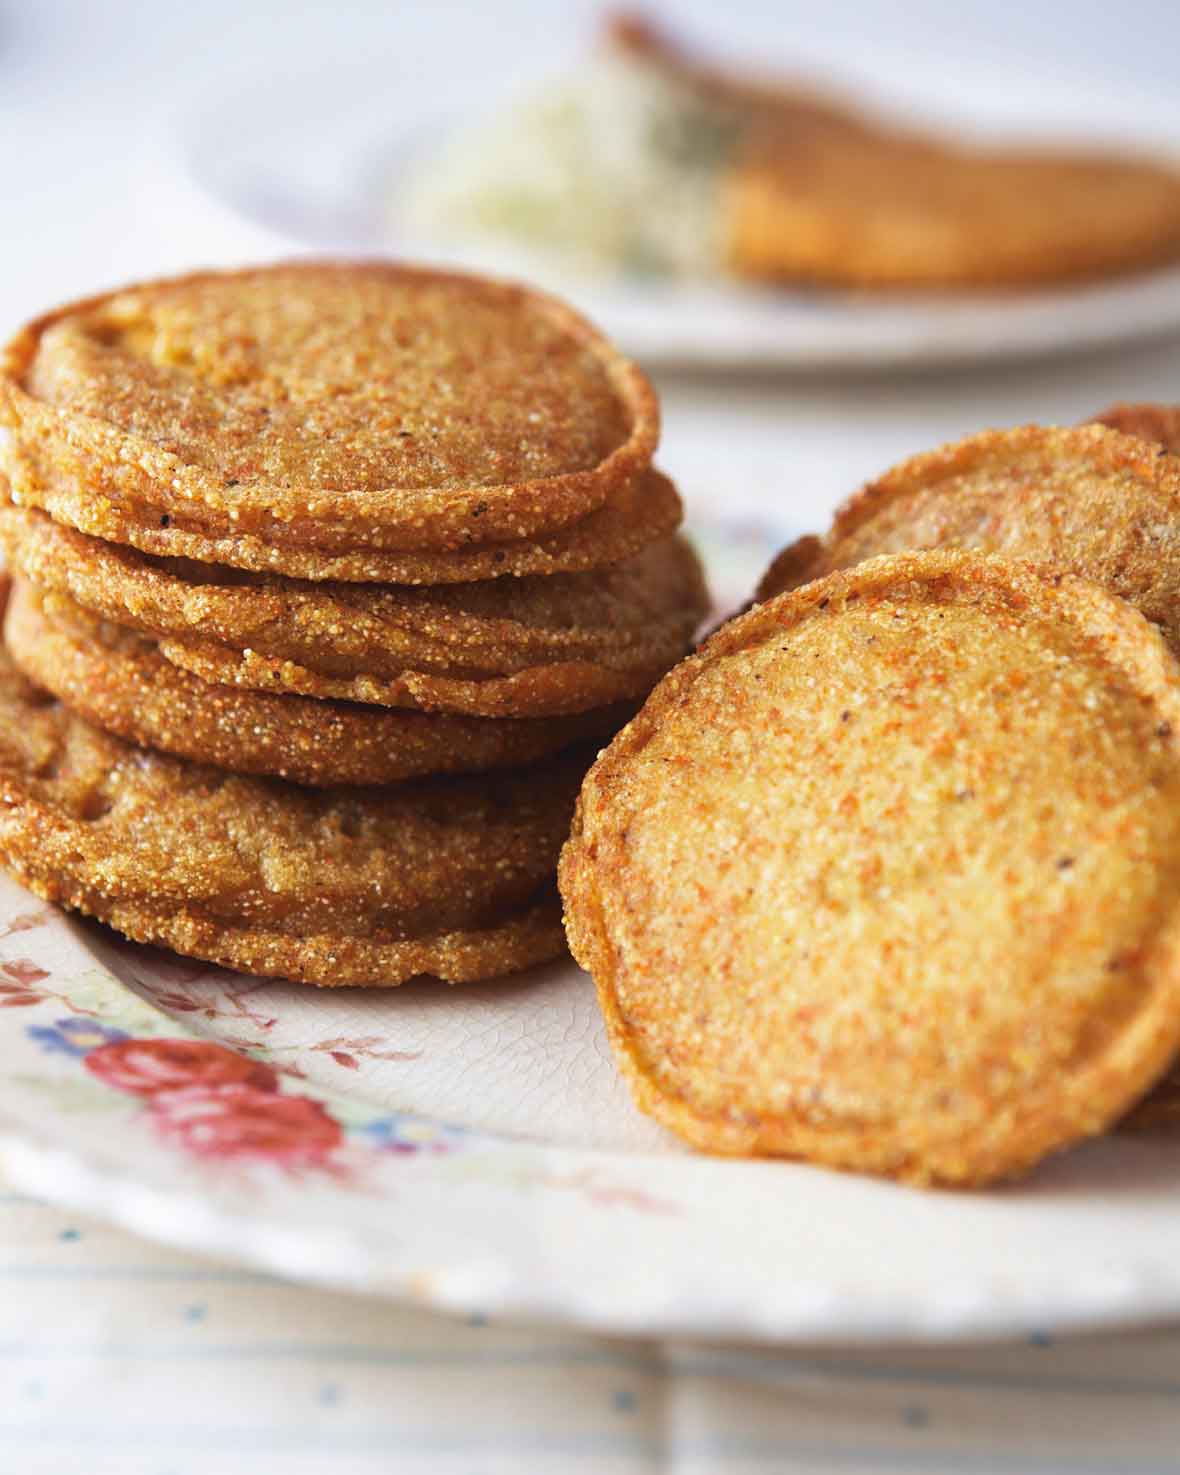 Two stacks of cornmeal griddle cakes on a patterned plate.